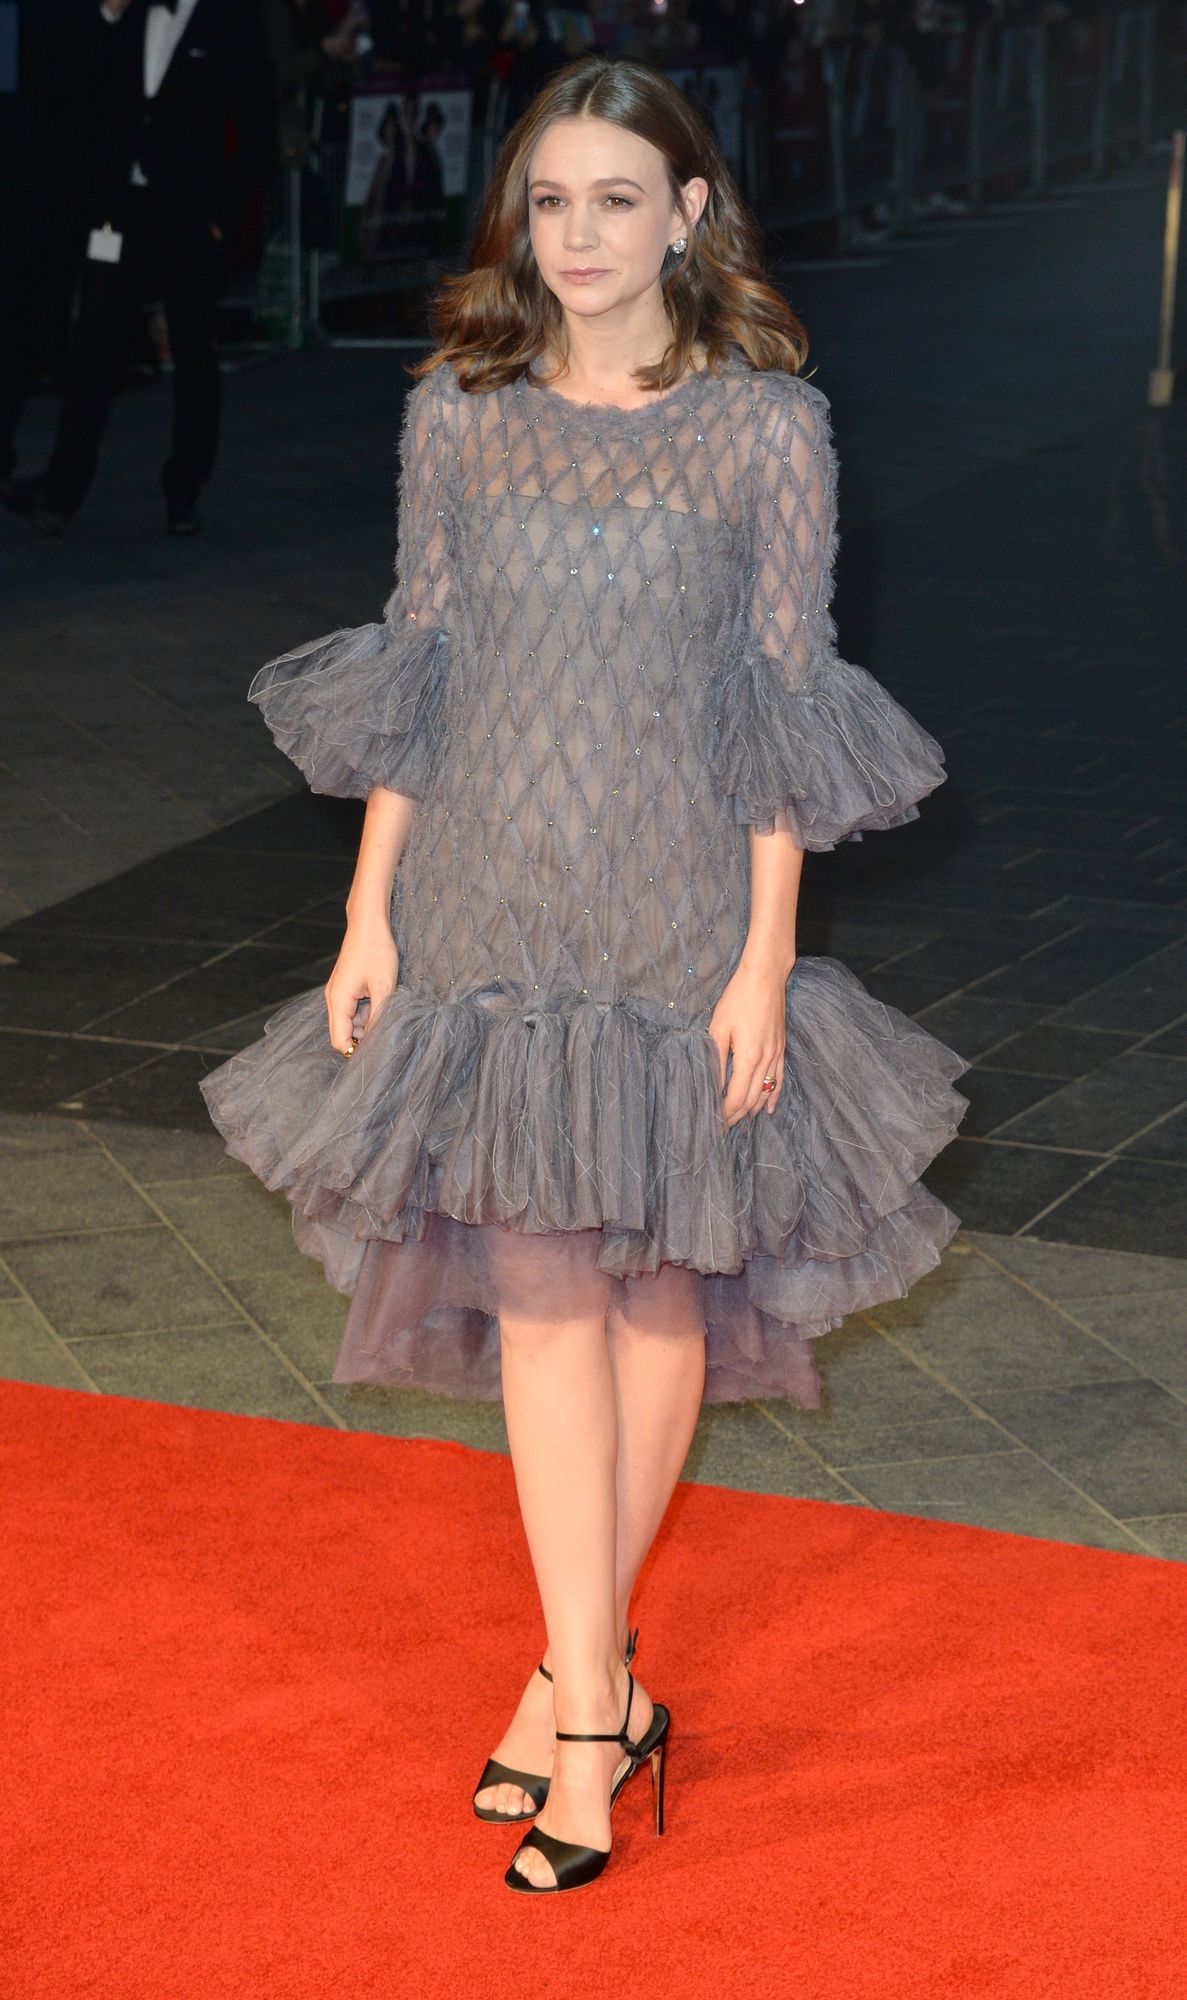 carey-mulligan-in-chanel-couture-suffragette-london-film-festival-opening-night-gala-premiere